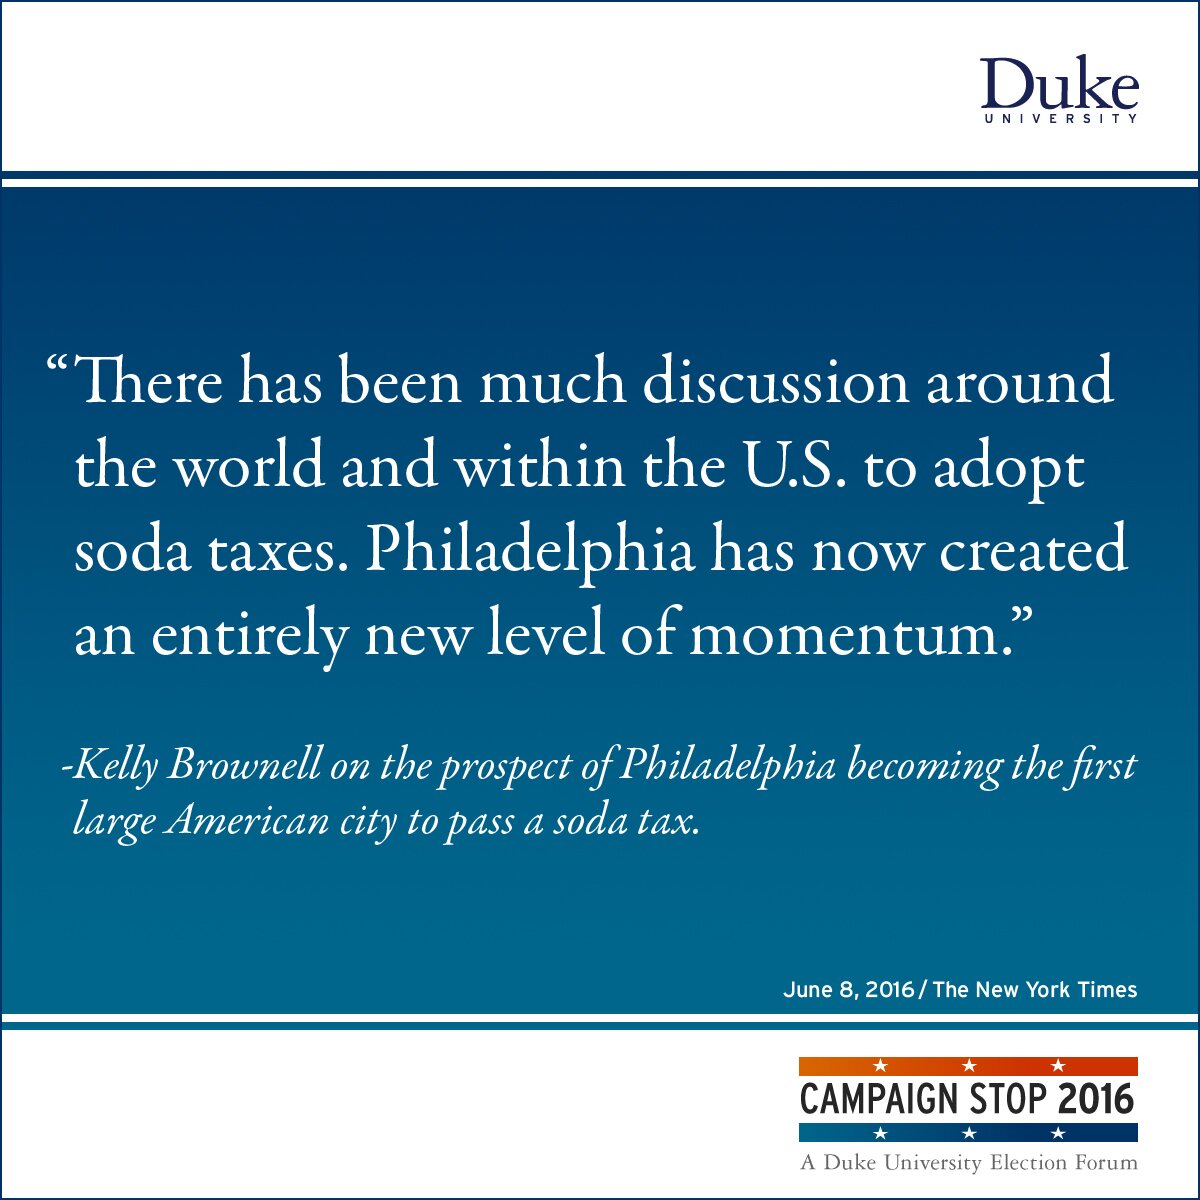 “There has been much discussion around the world and within the U.S. to adopt soda taxes. Philadelphia has now created an entirely new level of momentum.” -Kelly Brownell on the prospect of Philadelphia becoming the first large American city to pass a soda tax.